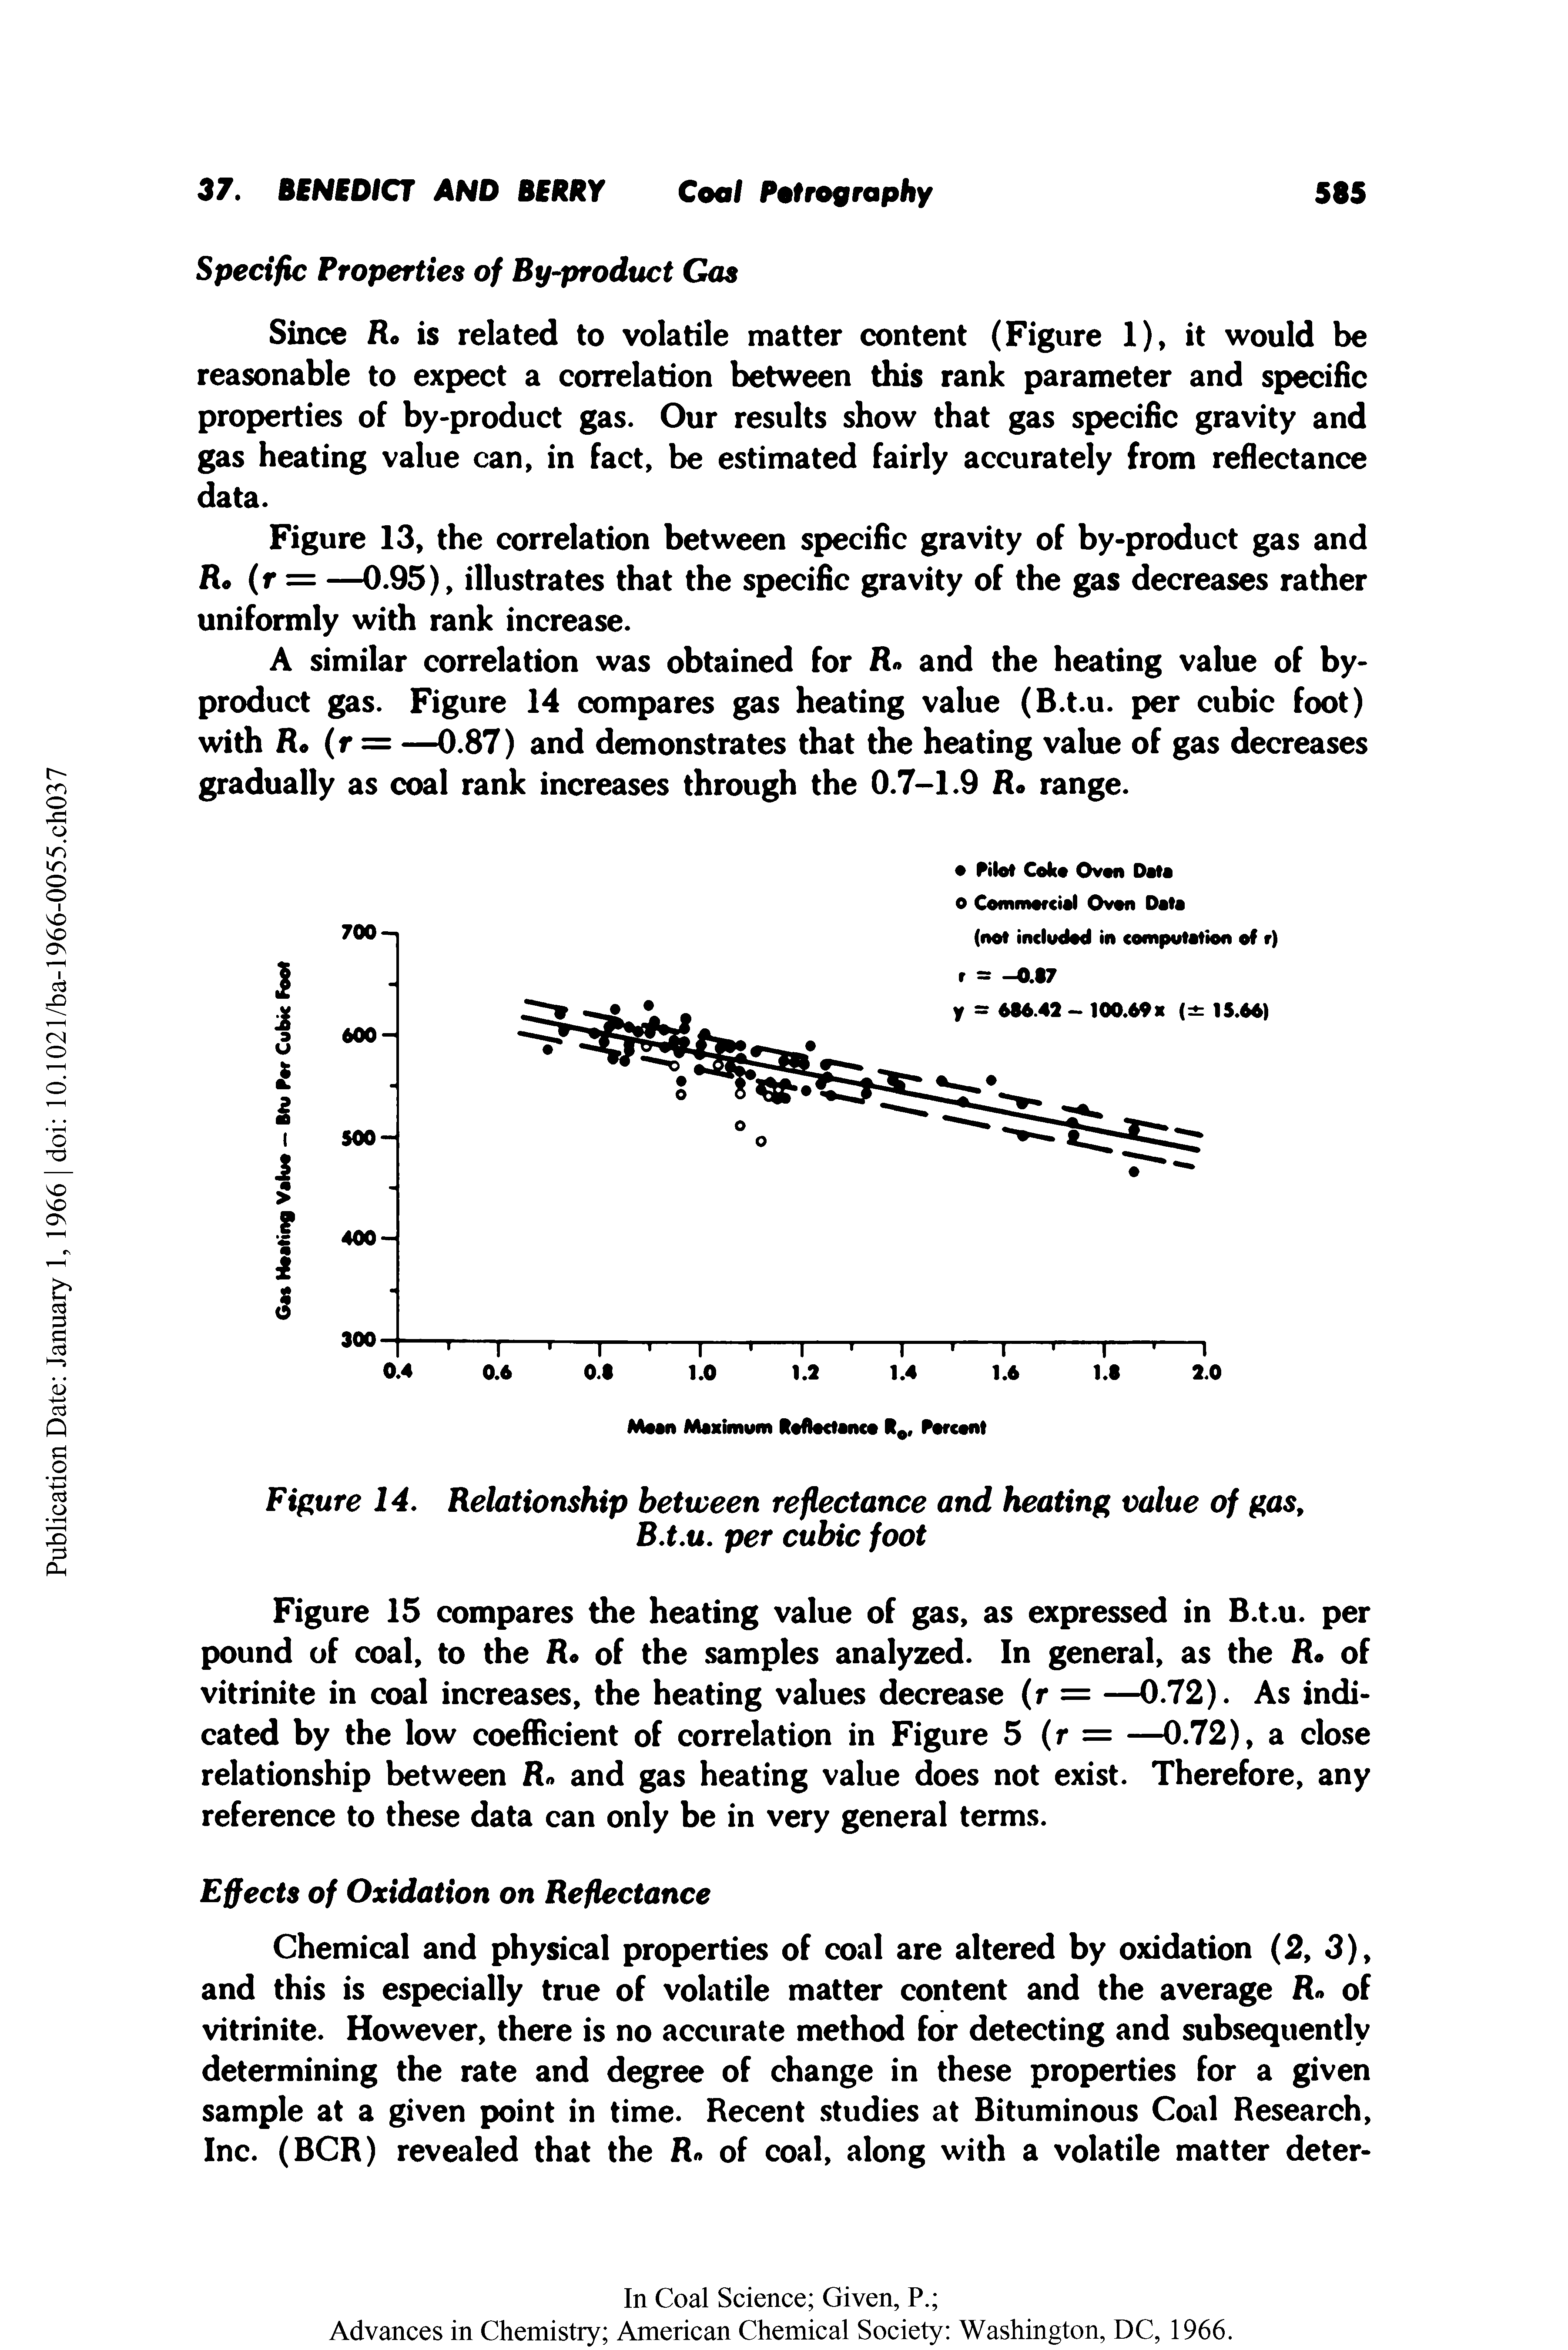 Figure 14. Relationship between reflectance and heating value of gas, B.t.u. per cubic foot...